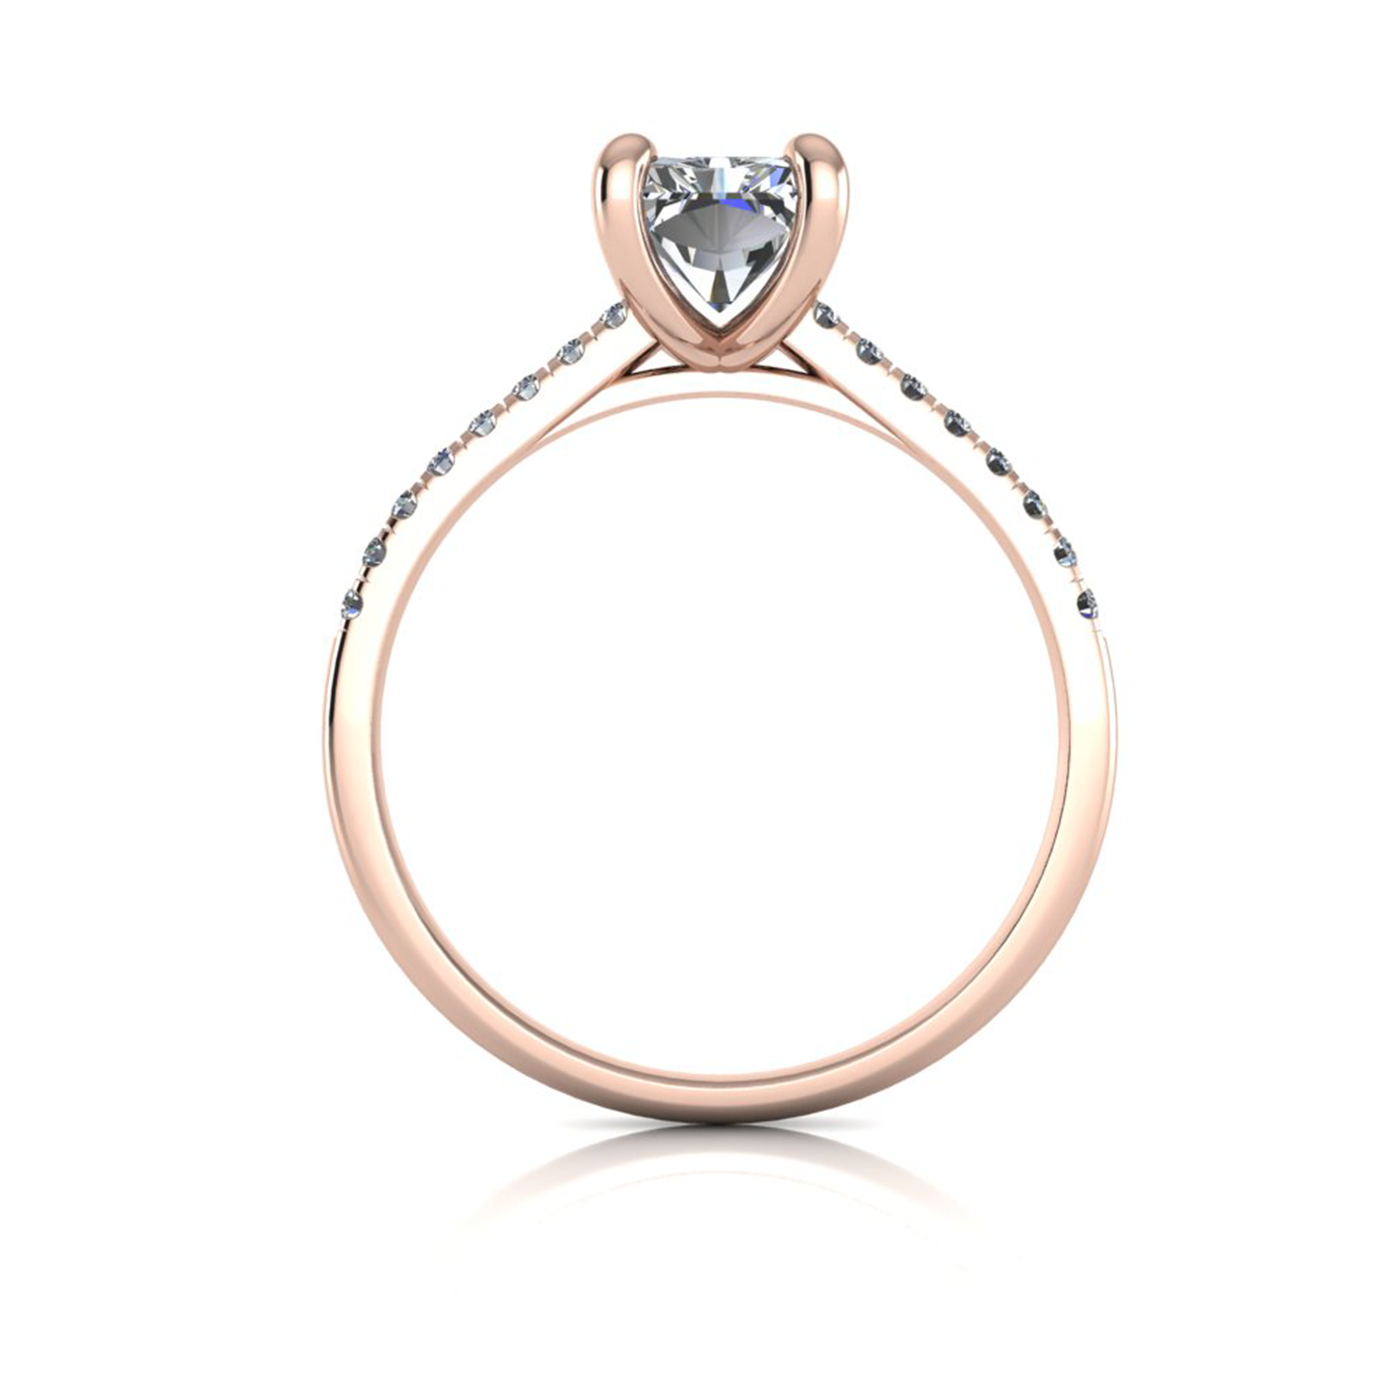 18k rose gold  1,50 ct 4 prongs radiant cut diamond engagement ring with whisper thin pavÉ set band